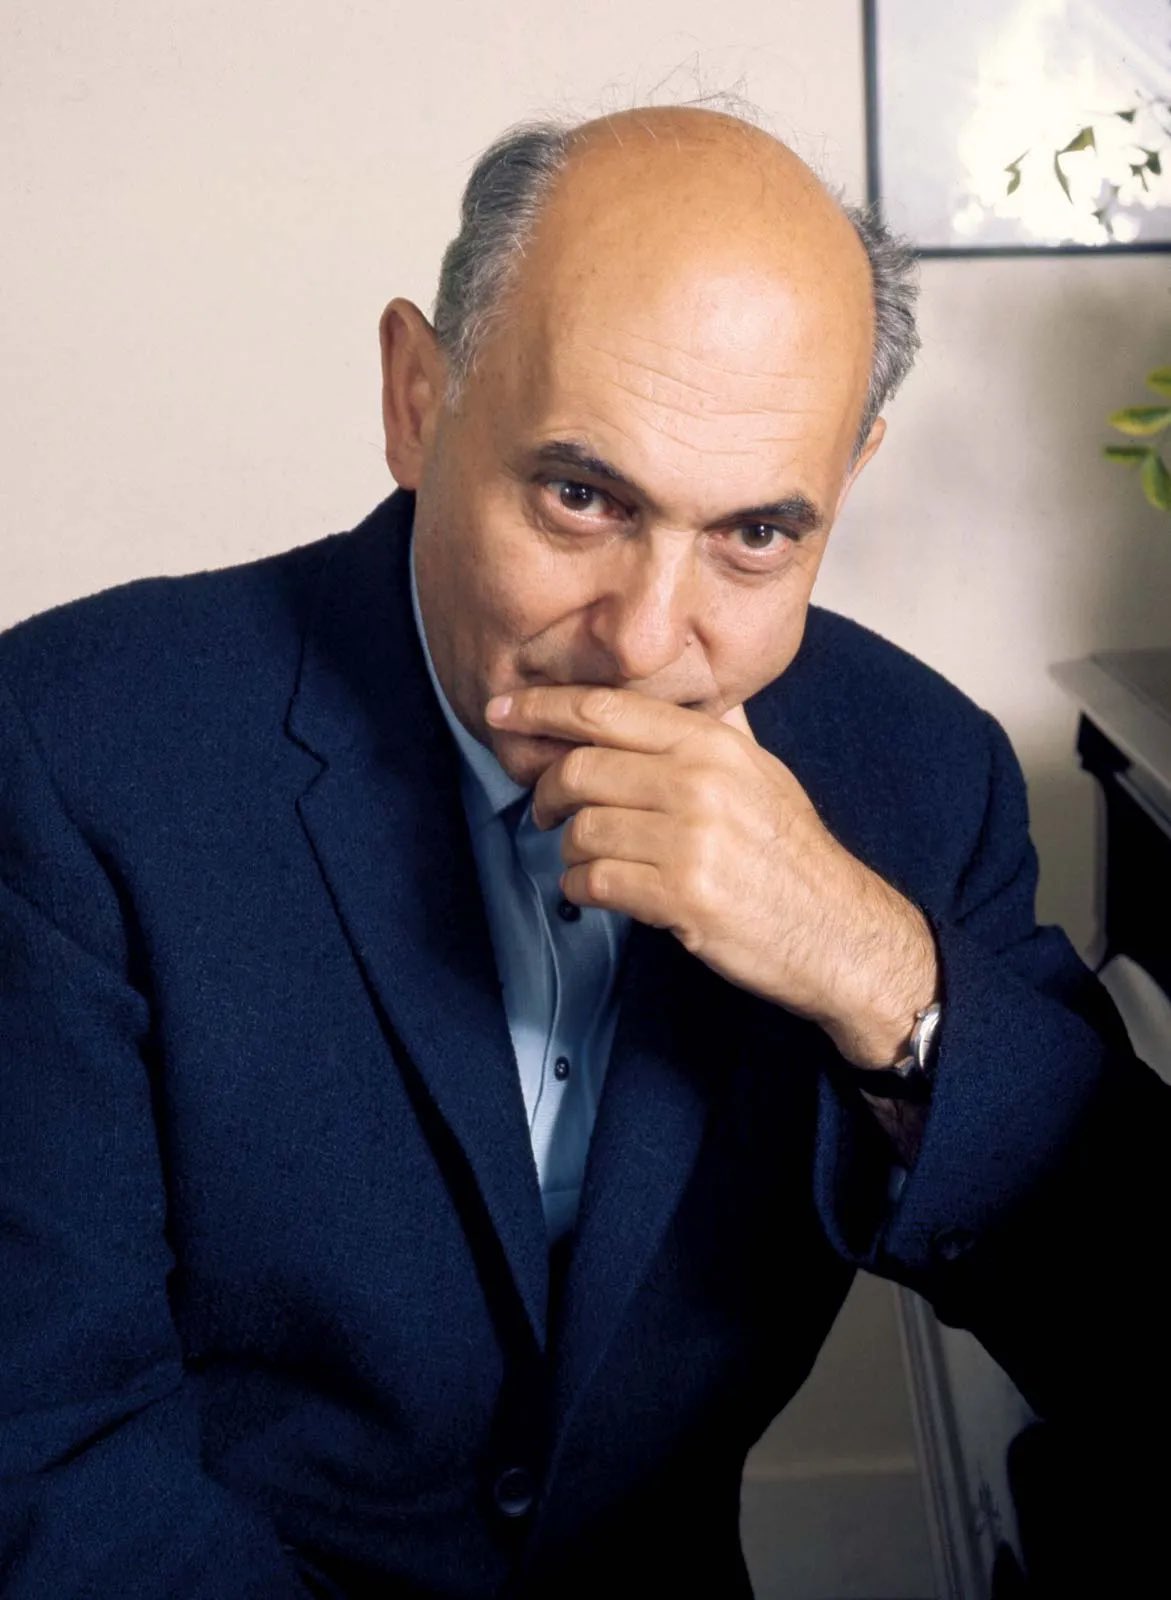 Who was Georg Solti?